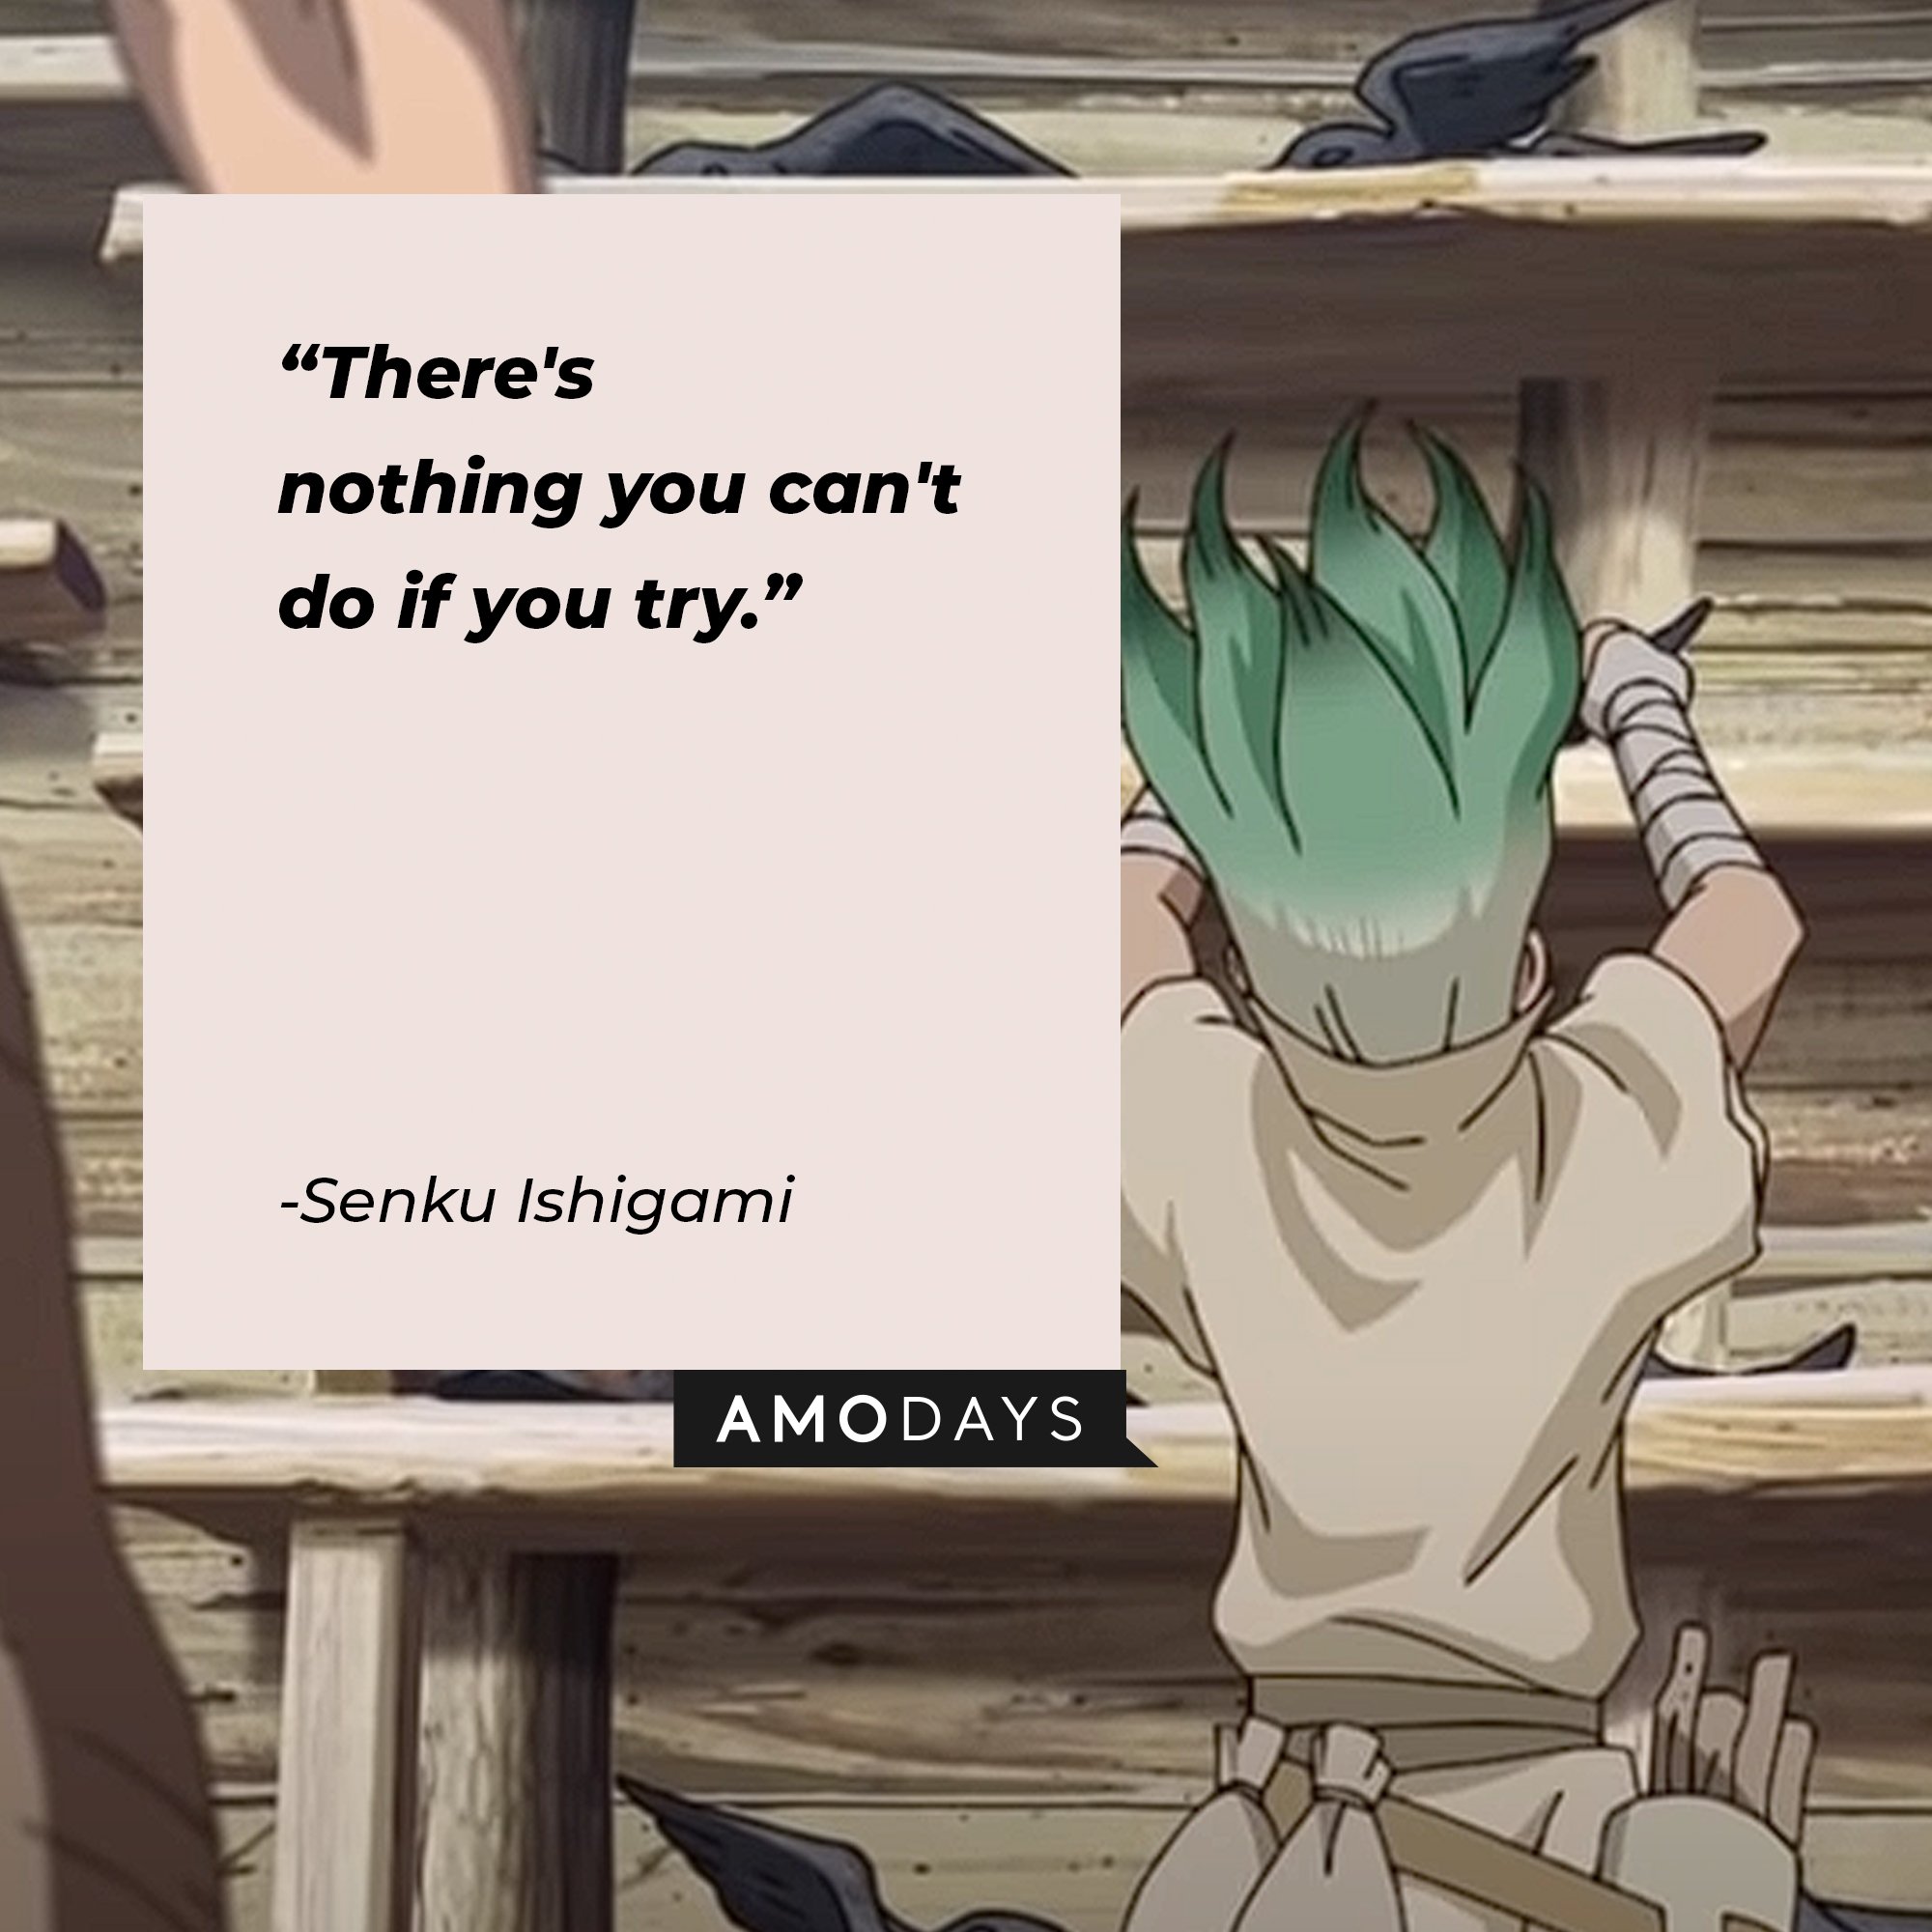 Senku Ishigami’s quote: "There's nothing you can't’ do if you try." | Image: AmoDays